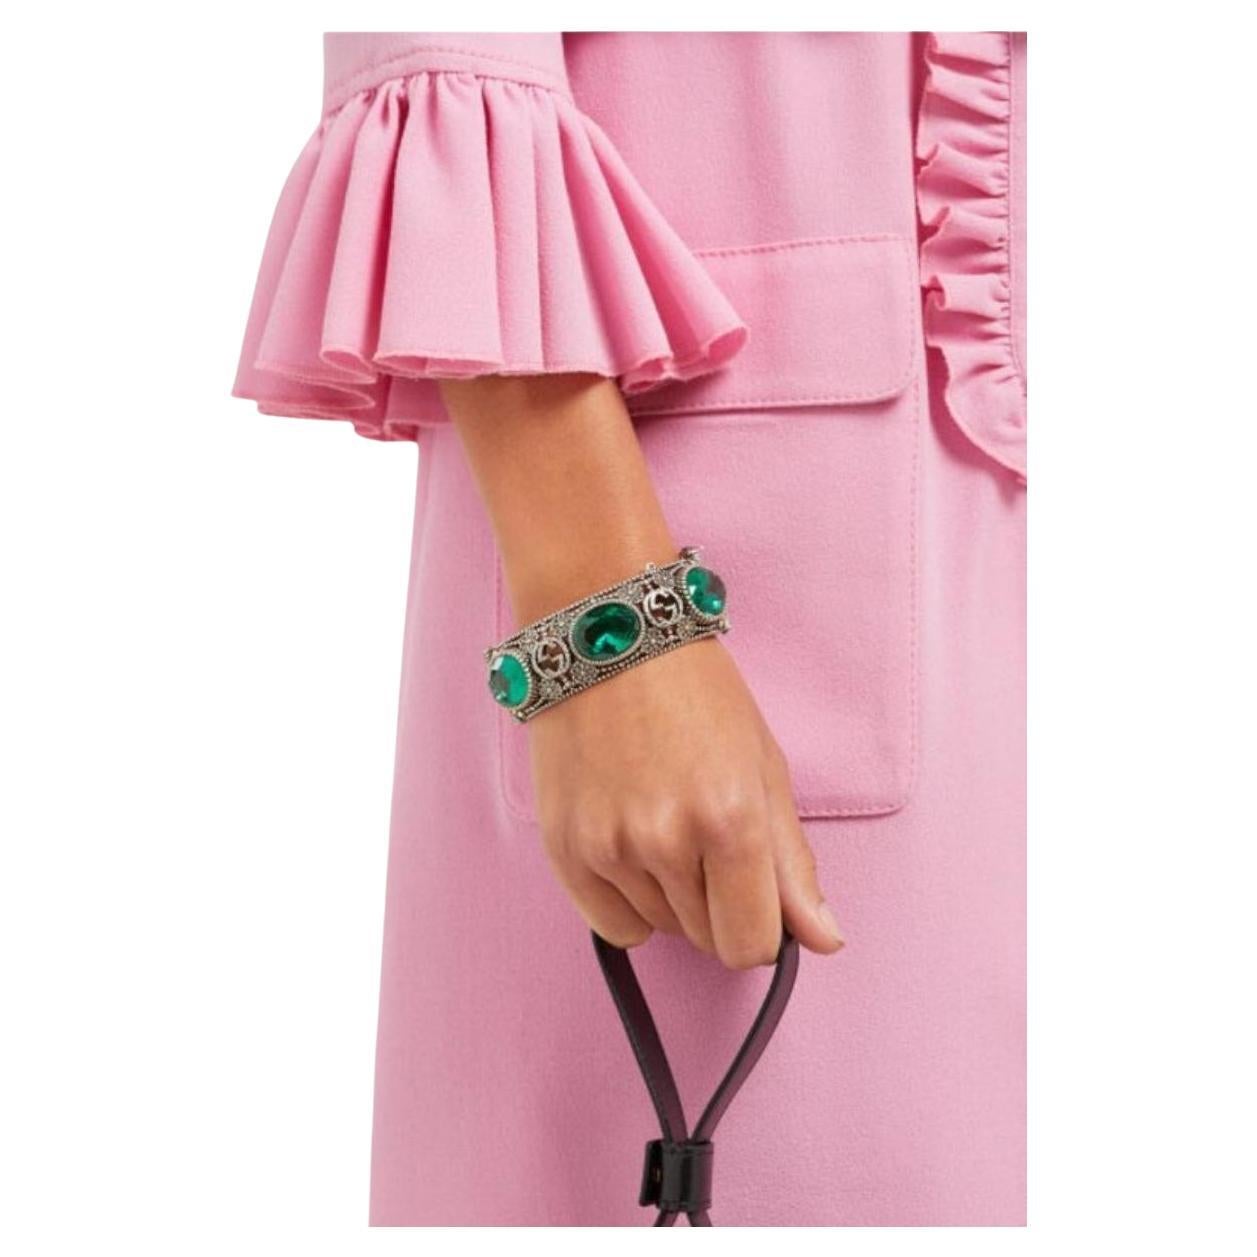 Follow us @runwaycatalog
Bracelet is crafted in Italy with the namesake motif interspersed with flowers - an archival tradition of the house - punctuated with faceted green crystals, and secures with a tiger - head bayonet fastening, for a sense of